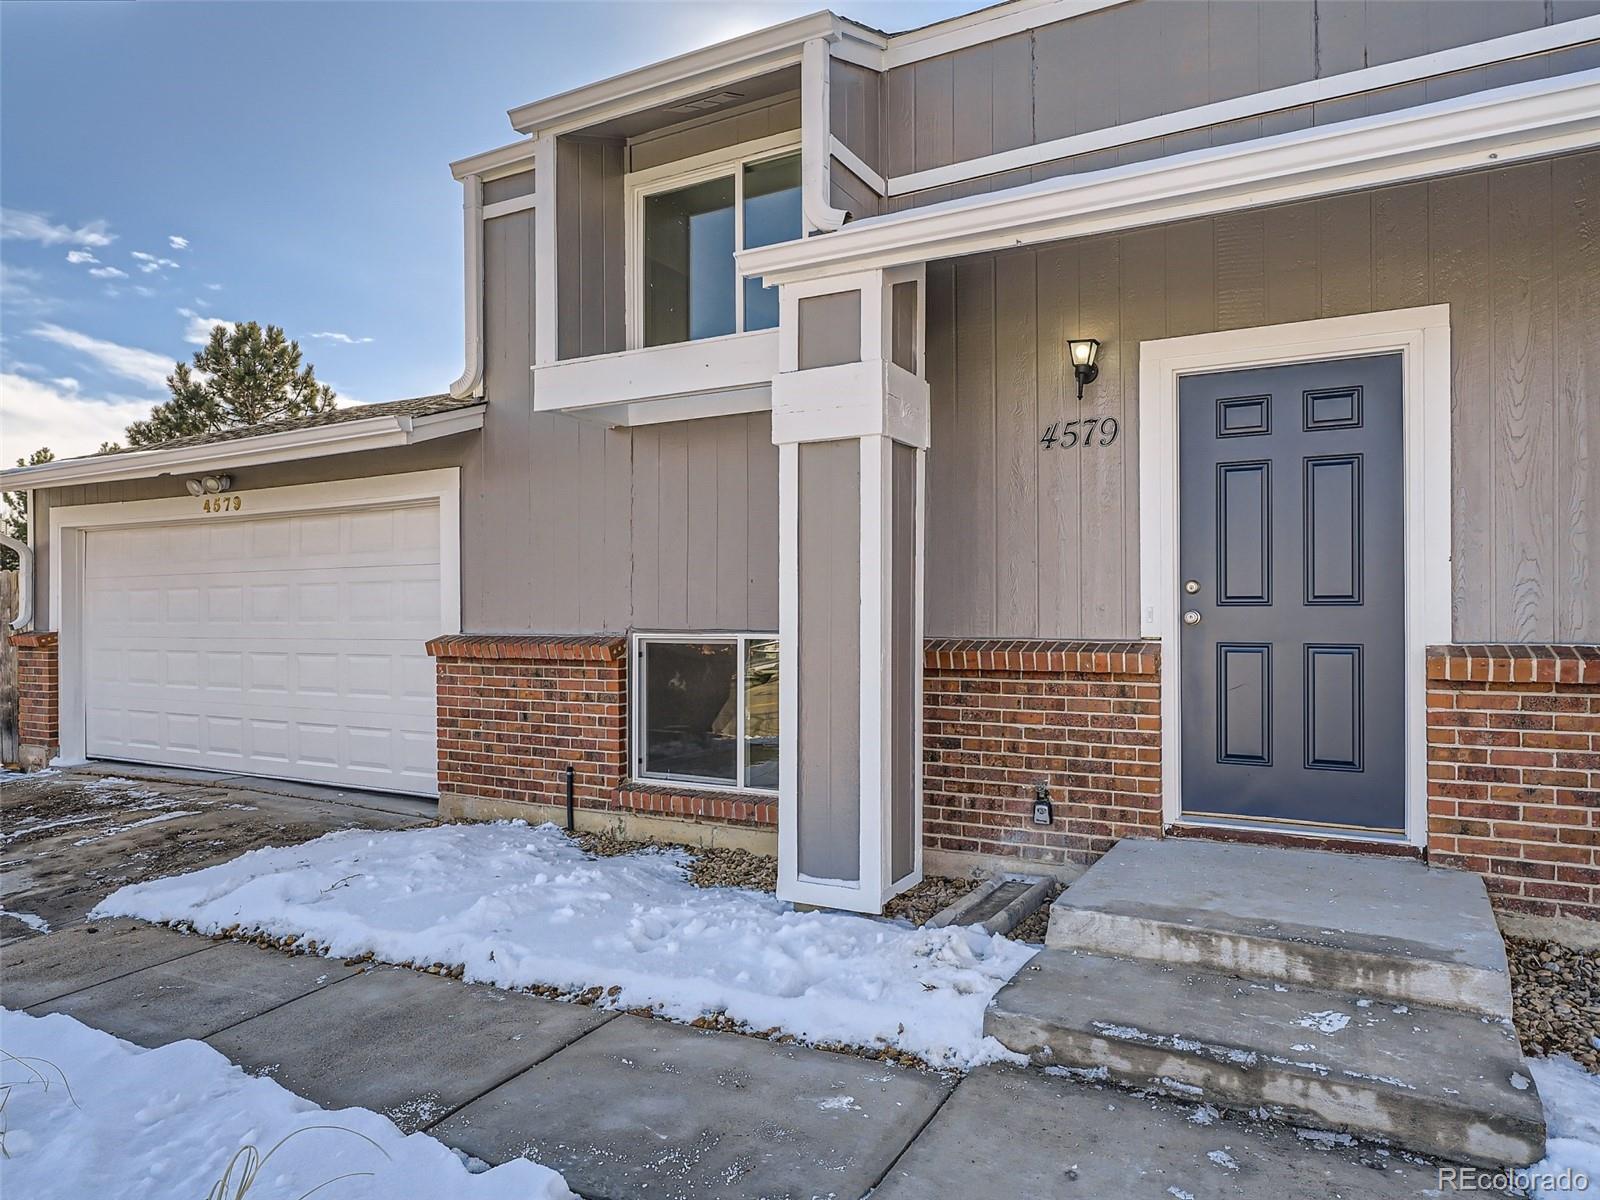 Report Image for 4579 S Ouray Way,Aurora, Colorado